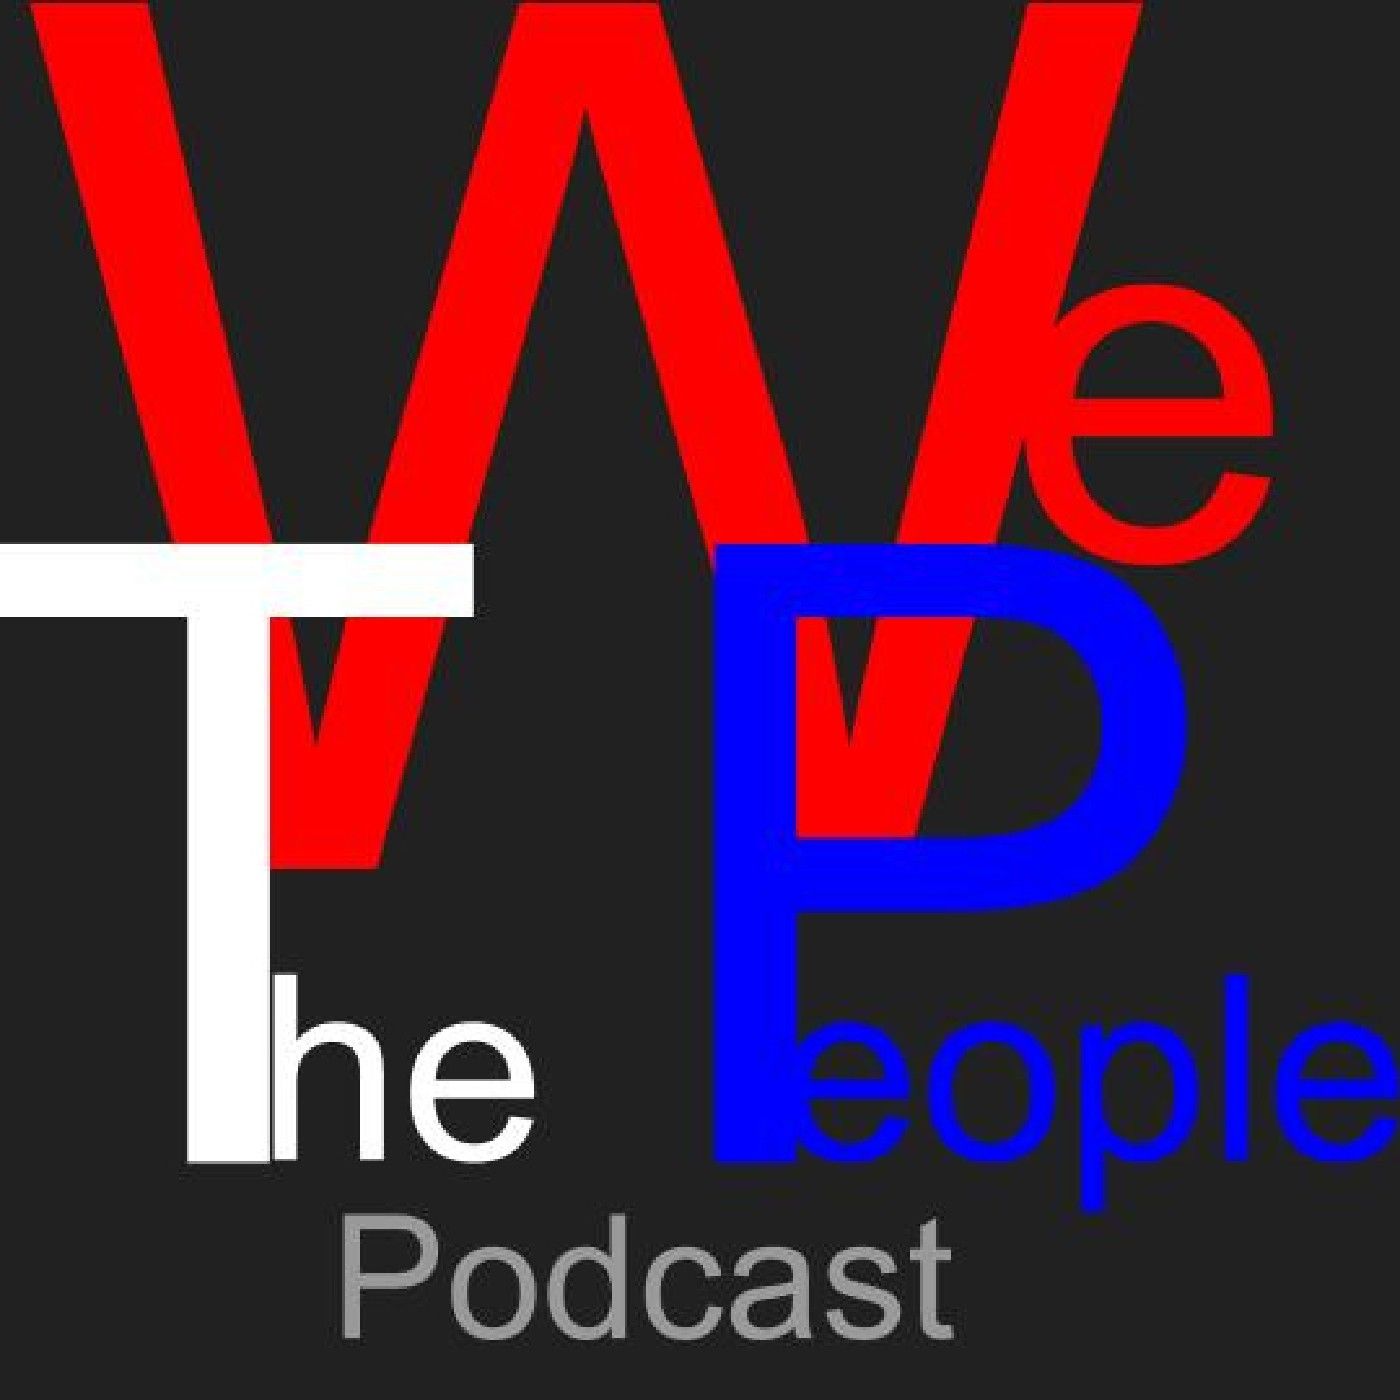 Episode 1.0 - We The People Podcast